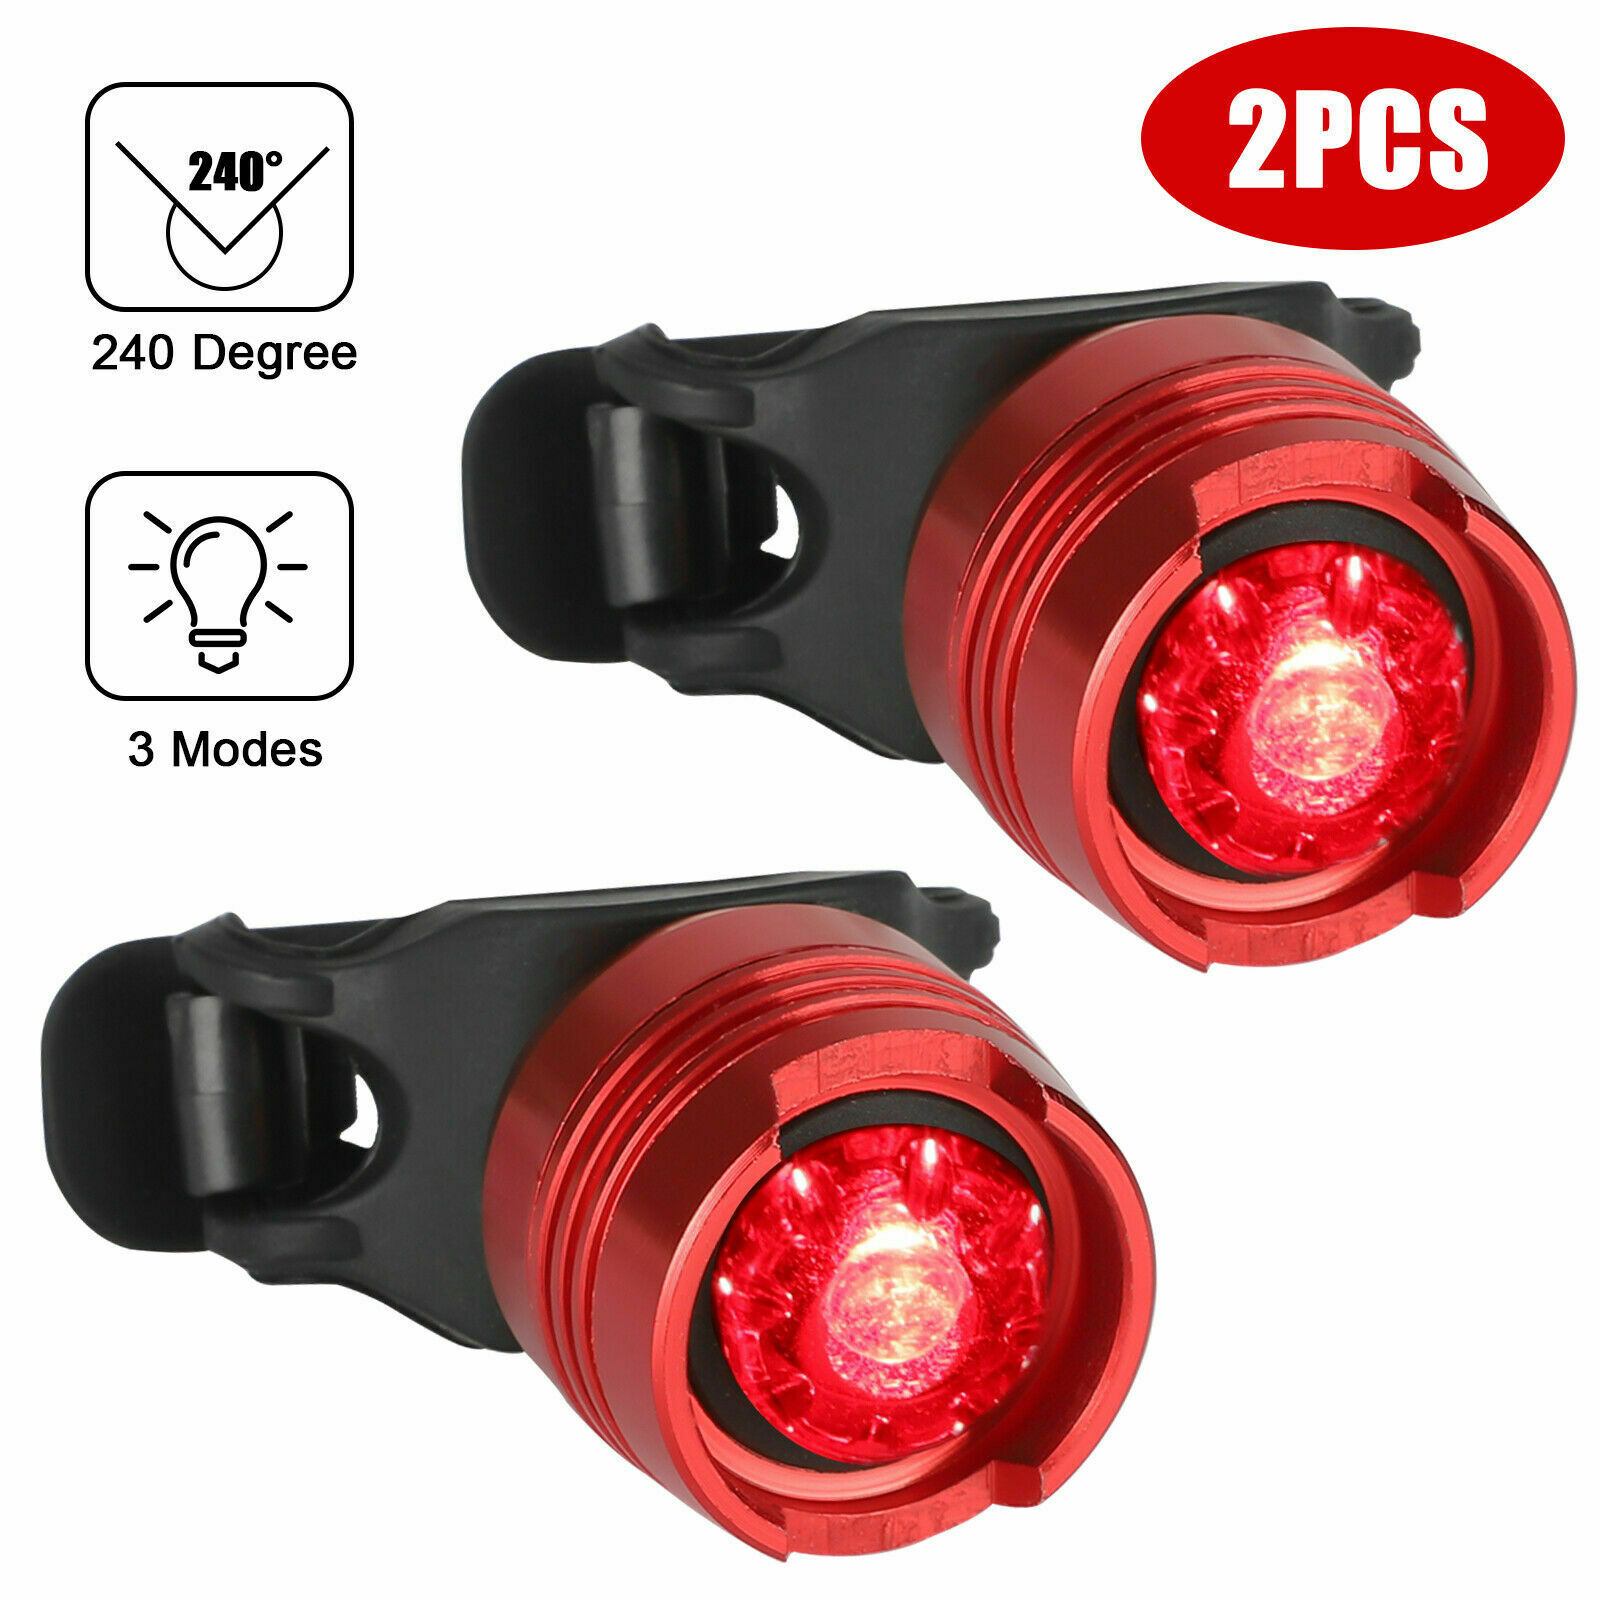 2×USB Rechargeable LED Bike Lights Set Headlight Taillight Caution Bicycle Light 